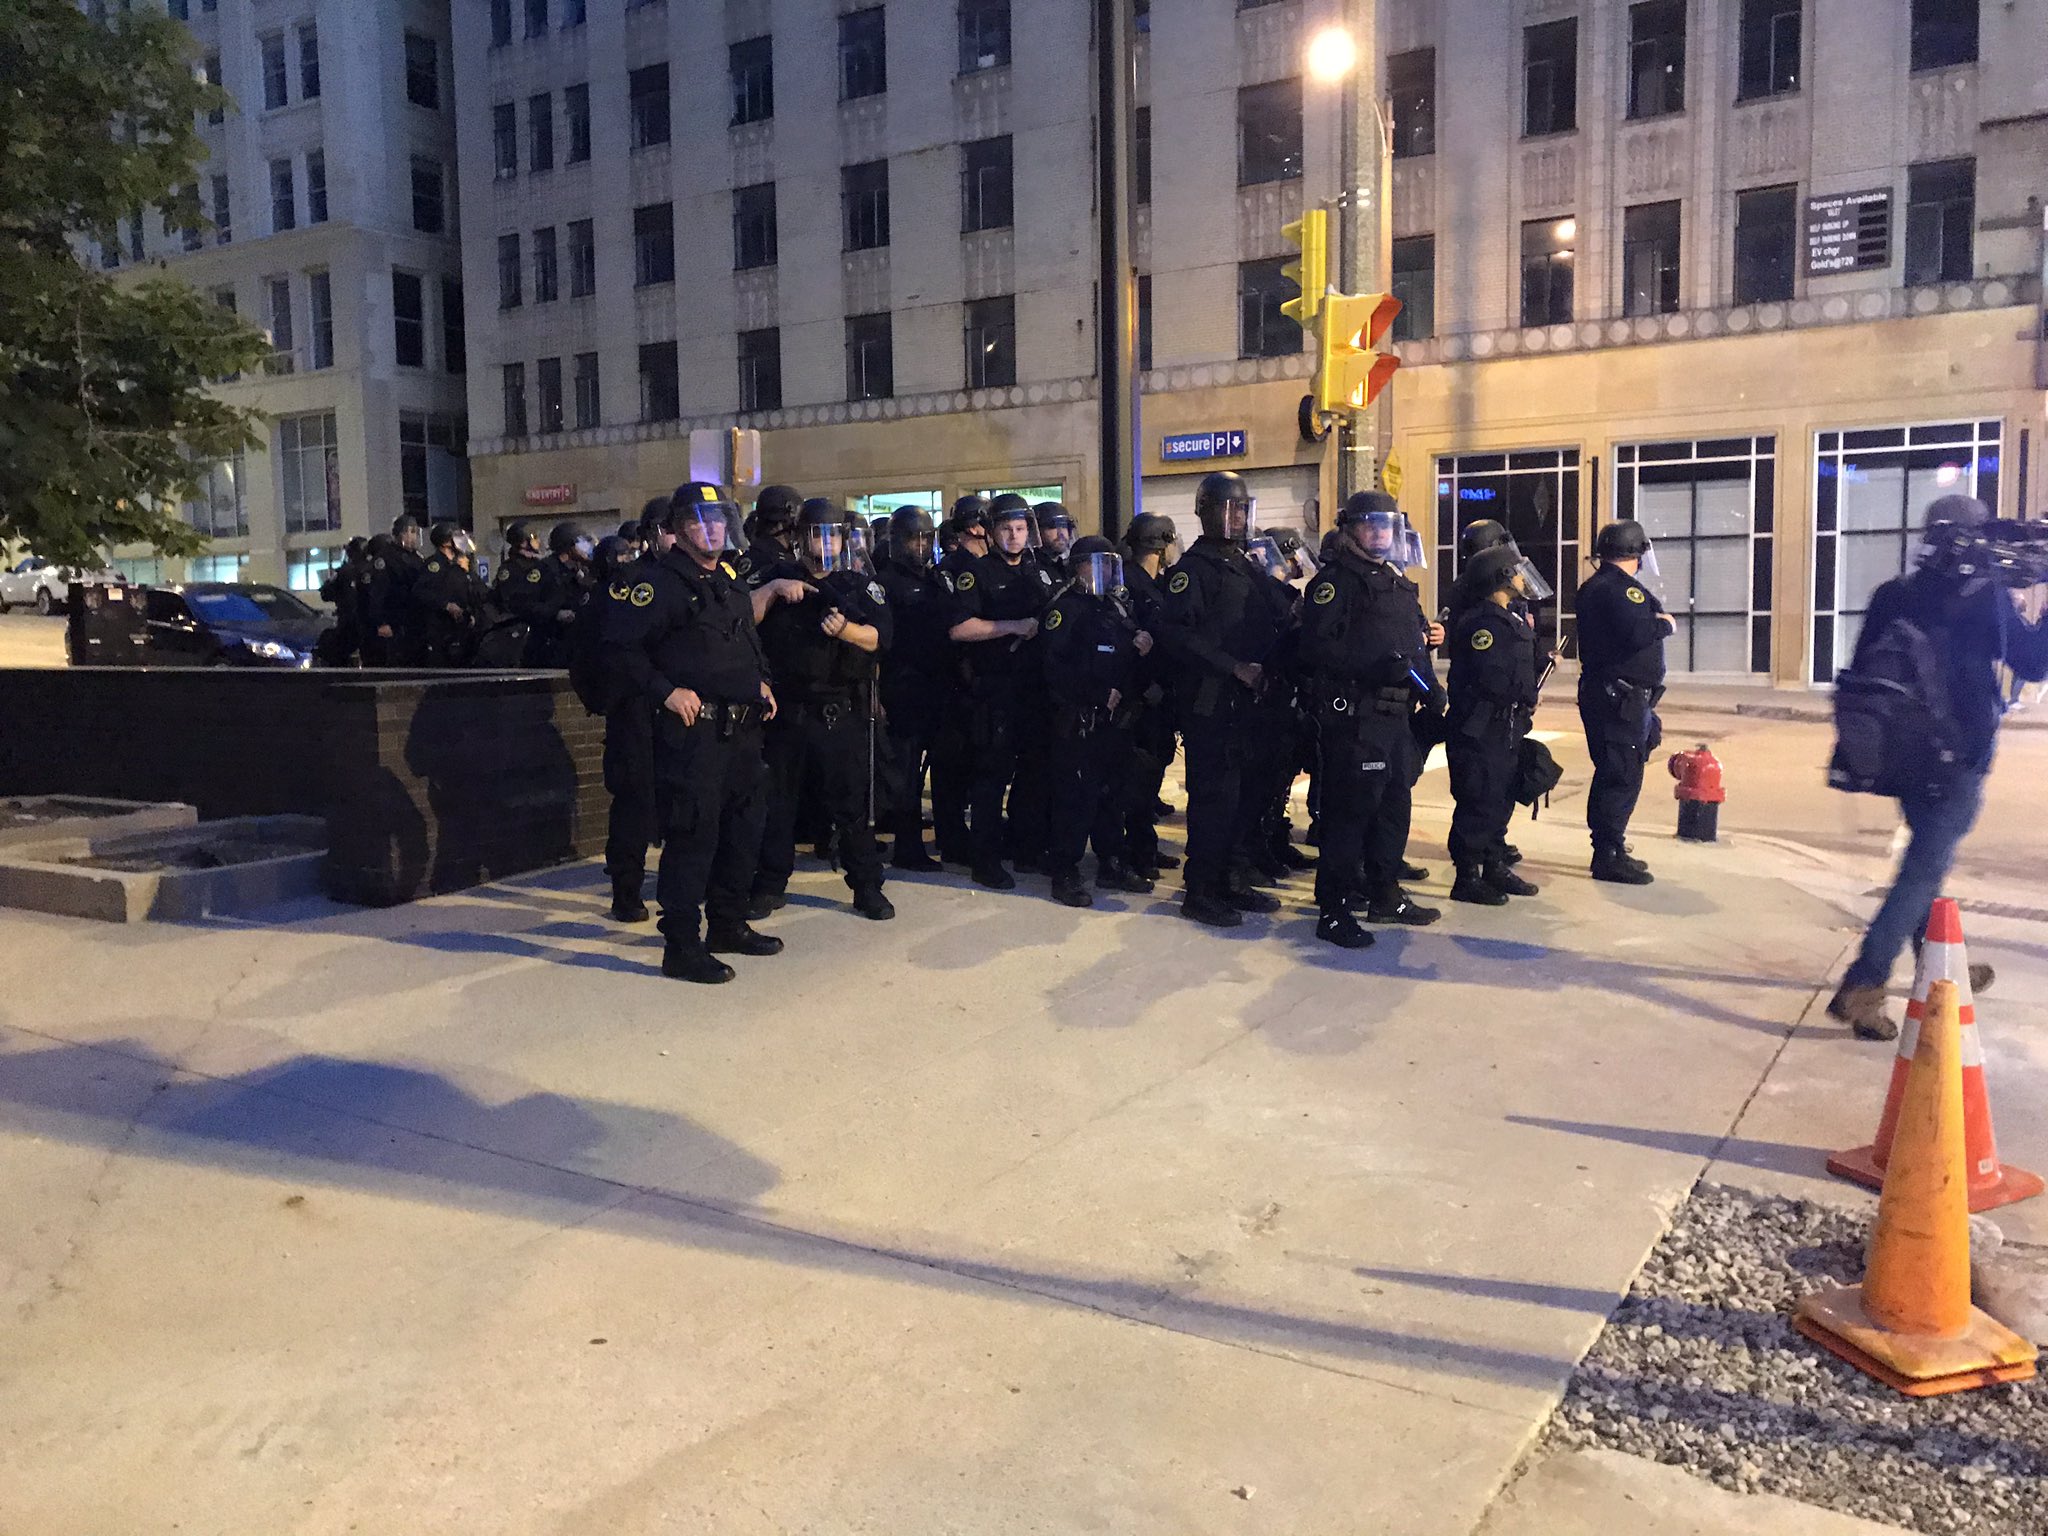 Police assemble close to the start of the citywide curfew on Monday night, June 1, 2020.